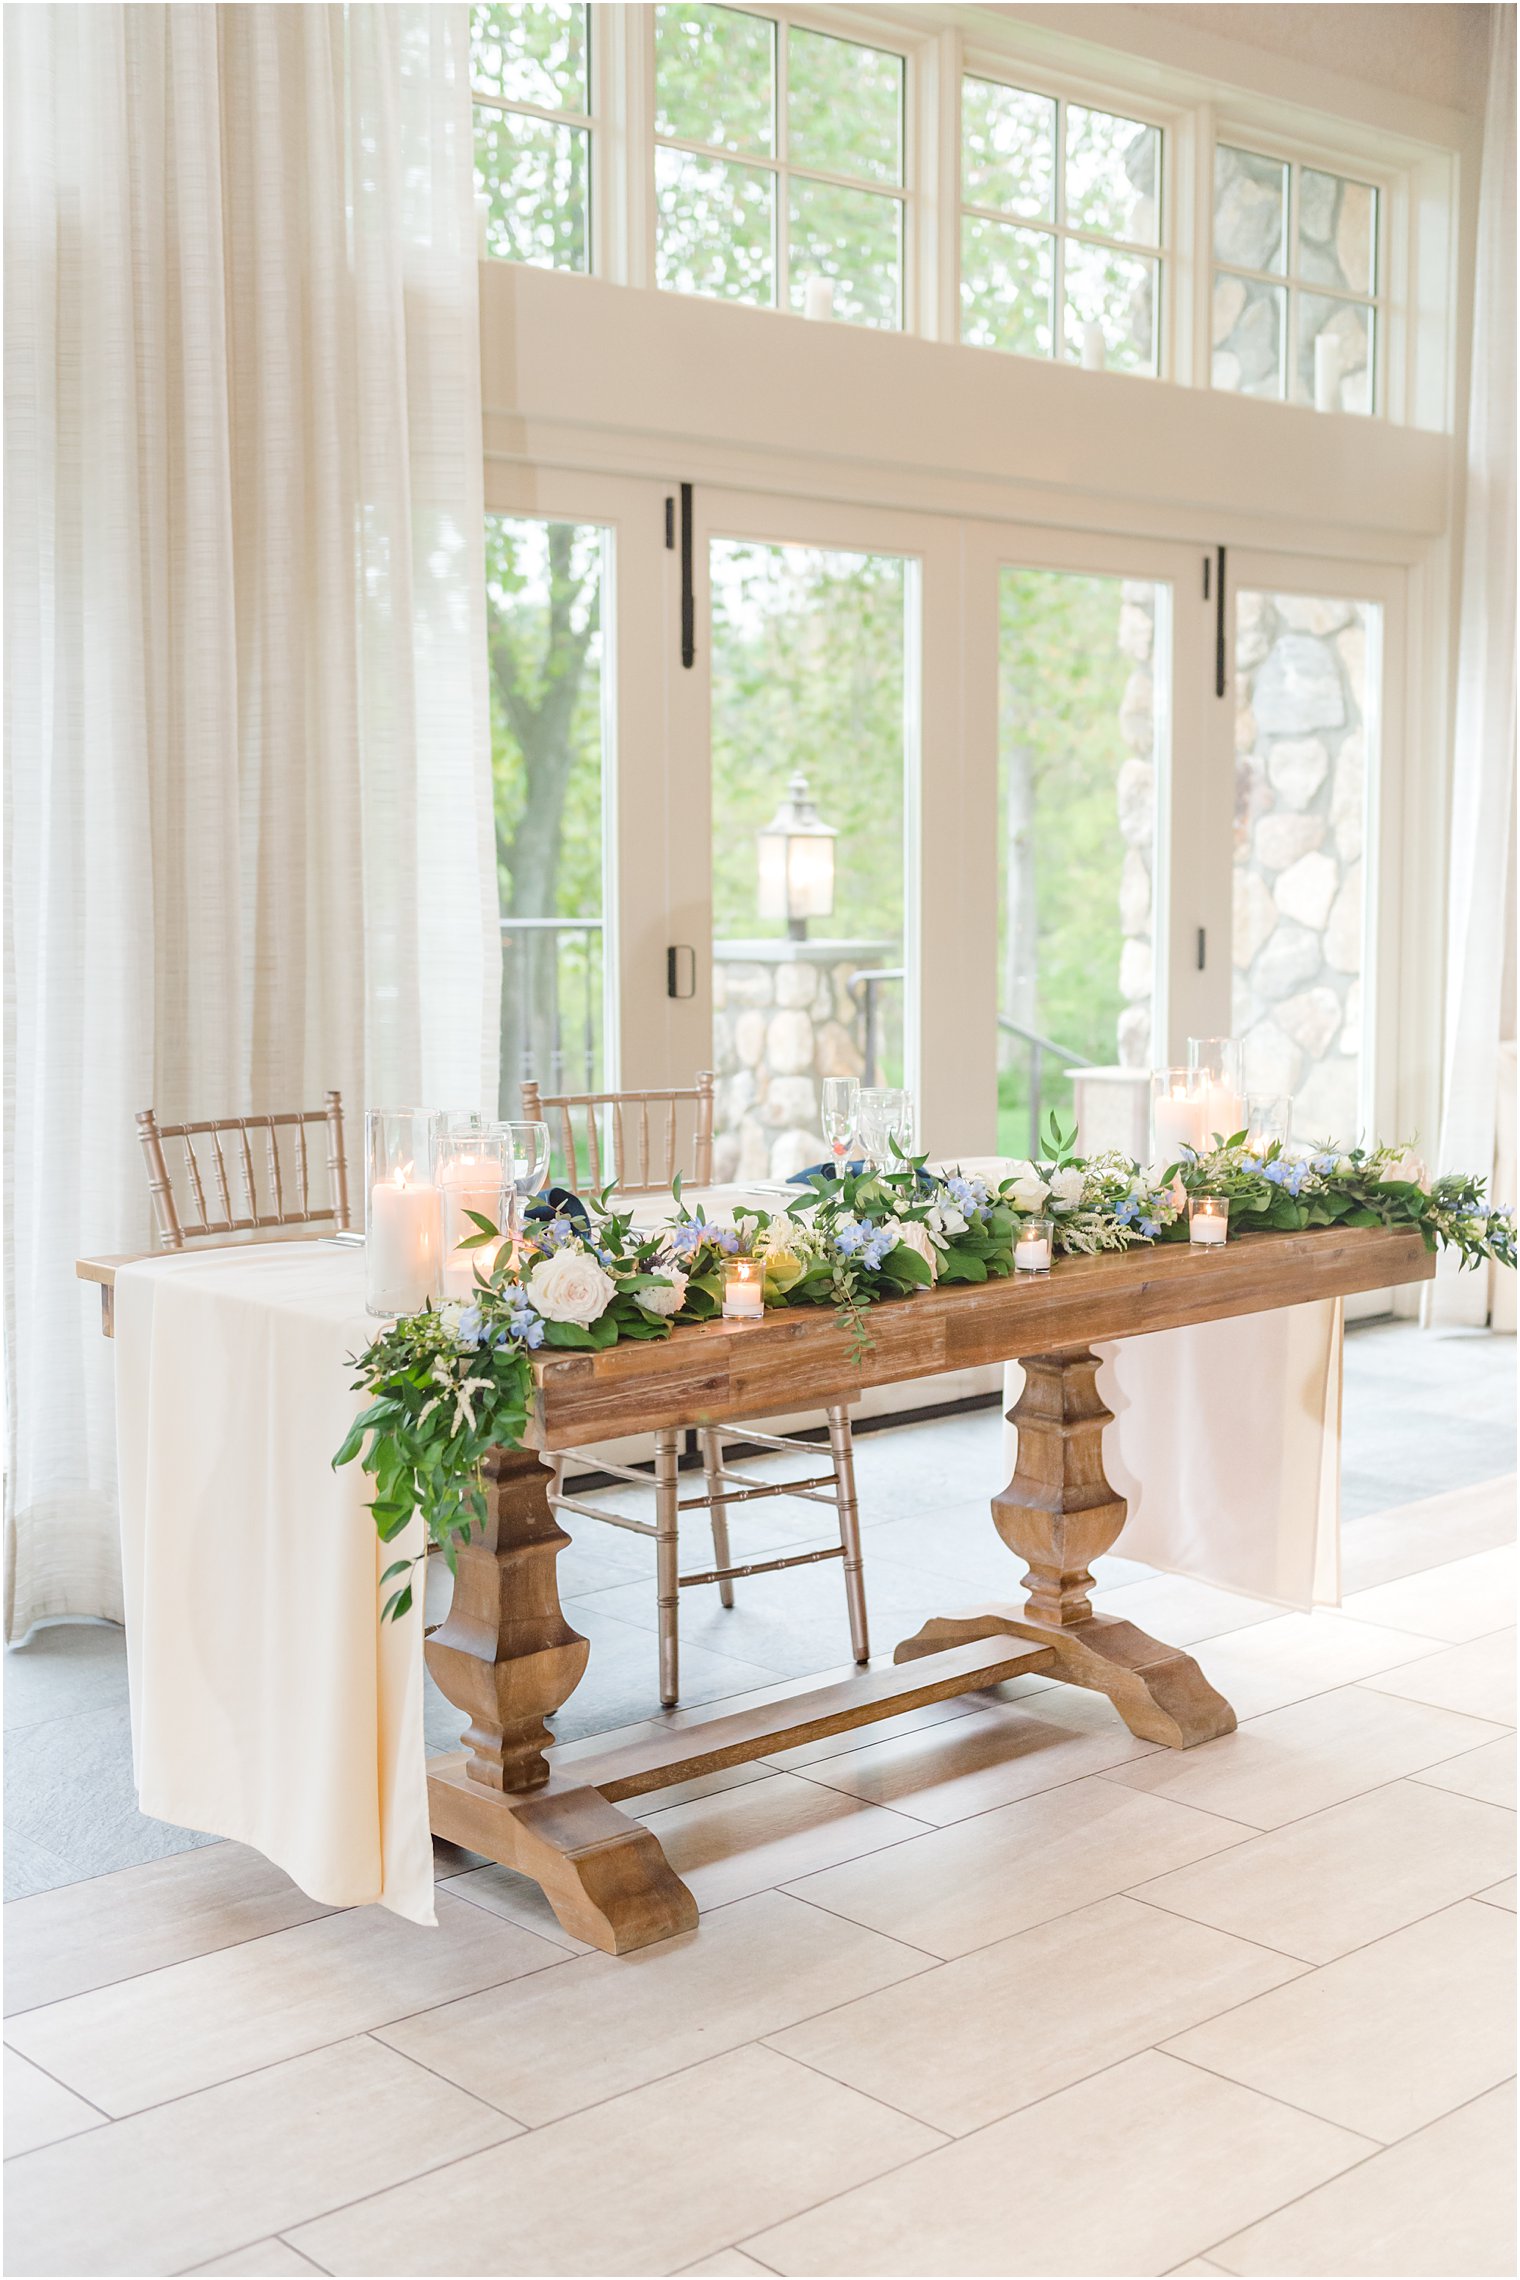 sweetheart table with white and blue flowers draped on greenery 